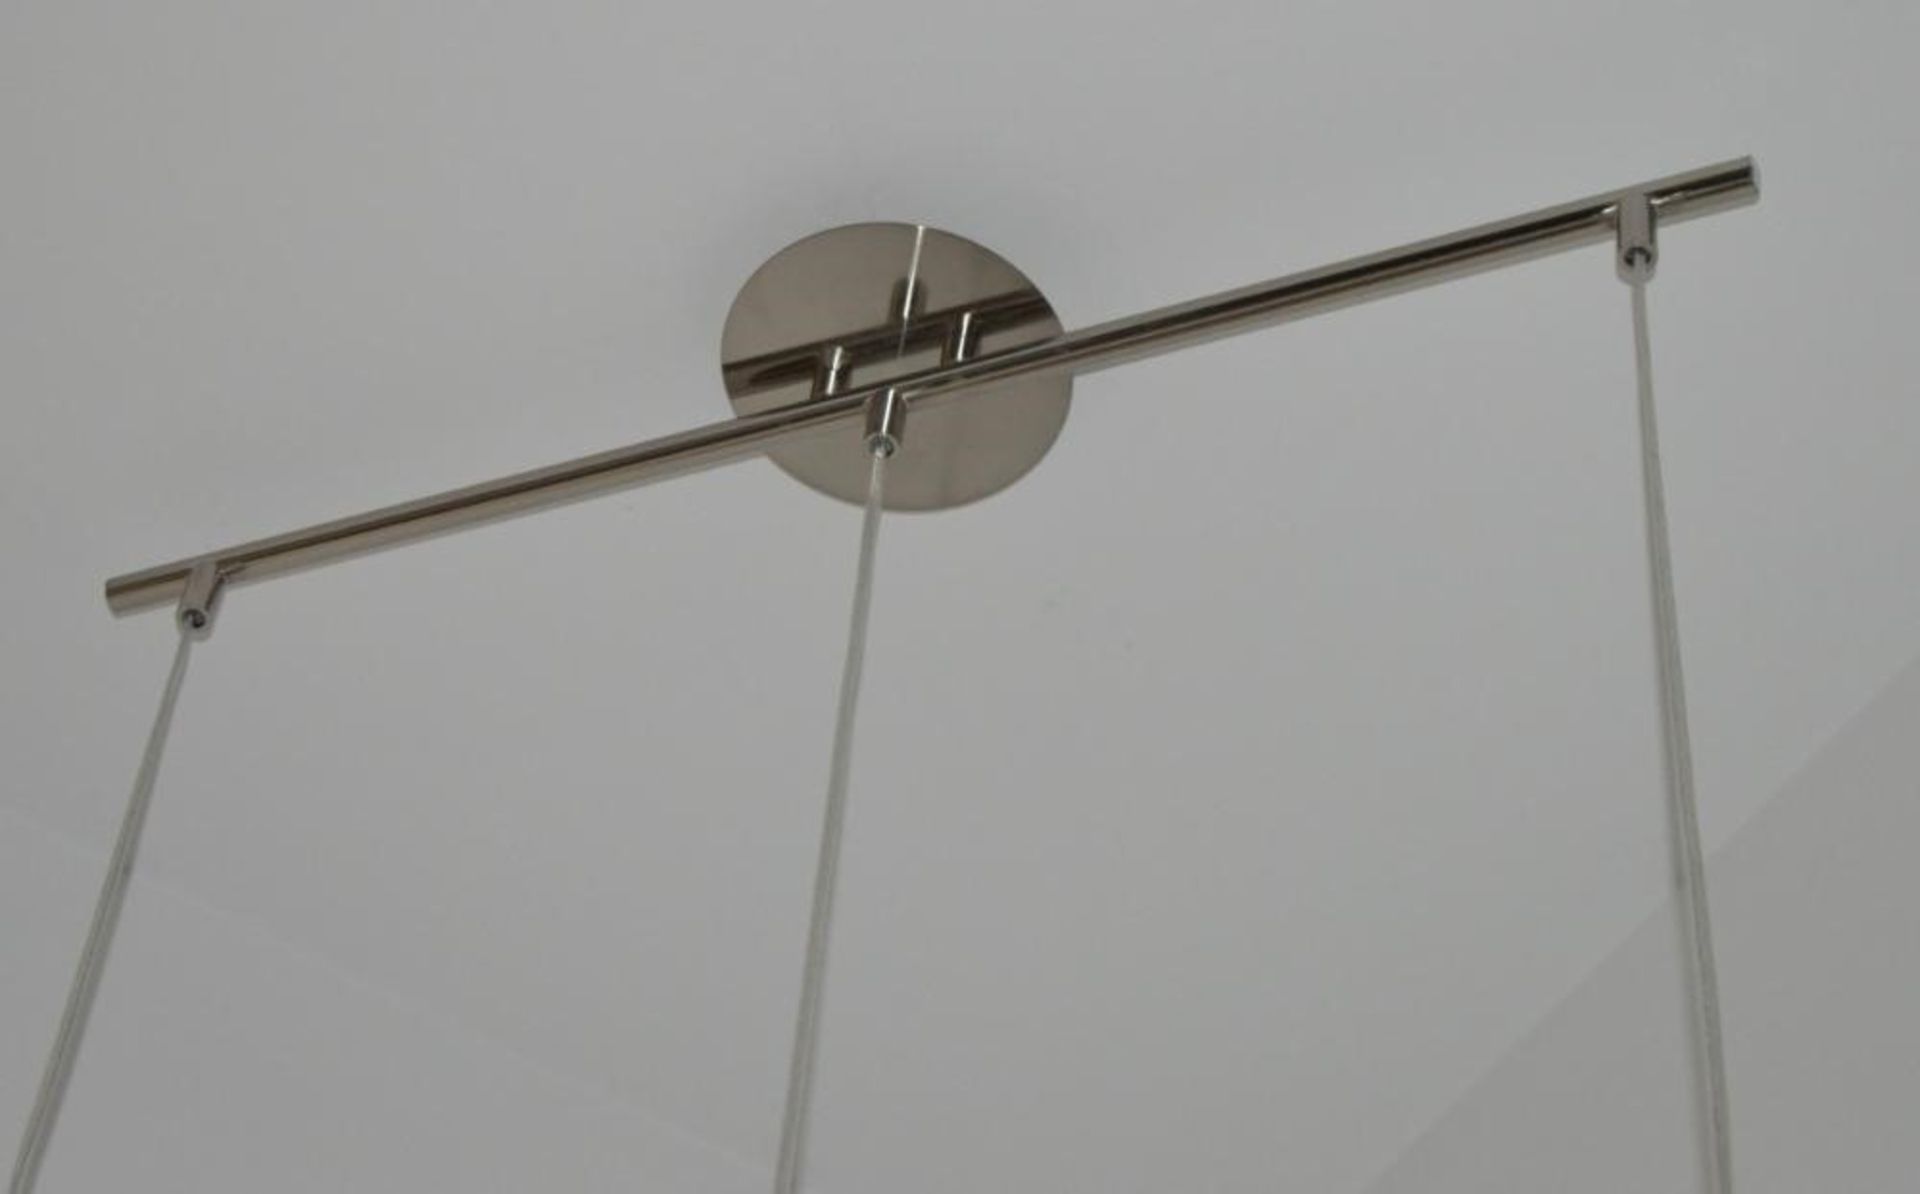 1 x Crackle White Mosaic Glass 3 Light Fitting With Dome Shades and Satin Silver Trim - Ex Display S - Image 2 of 5